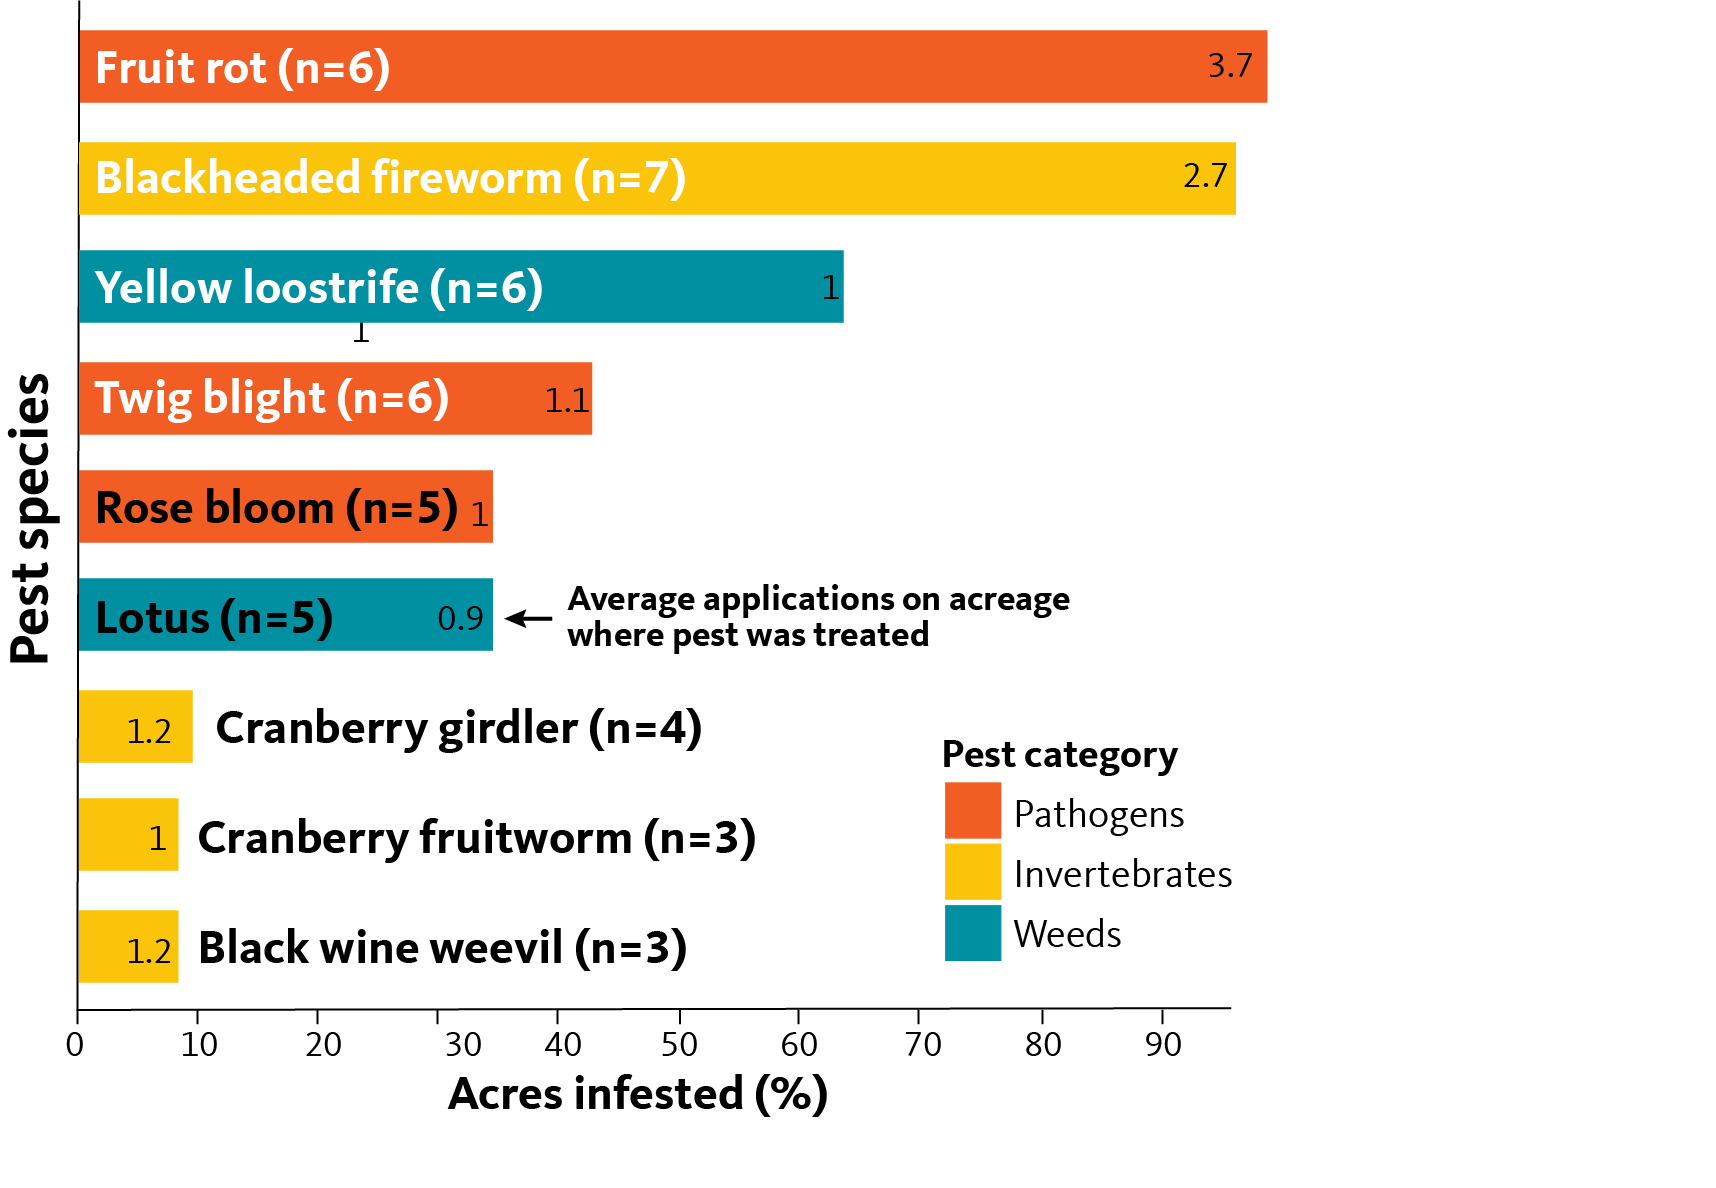 Bar chart showing fruit rot and blackheads fireworm requiring most inputs